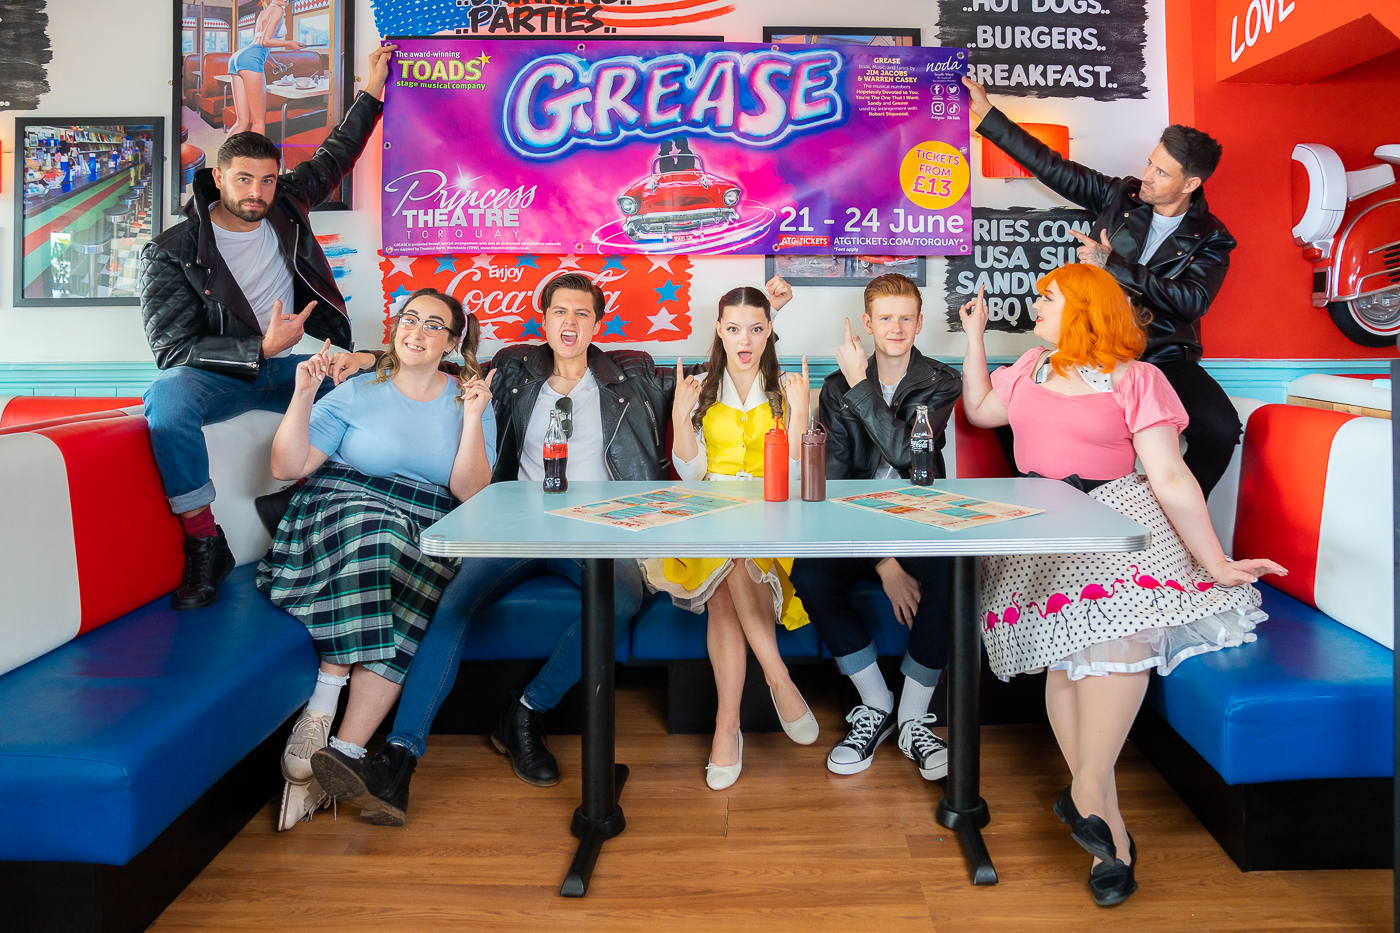 Theatre-Photography-Grease-Promotional-8